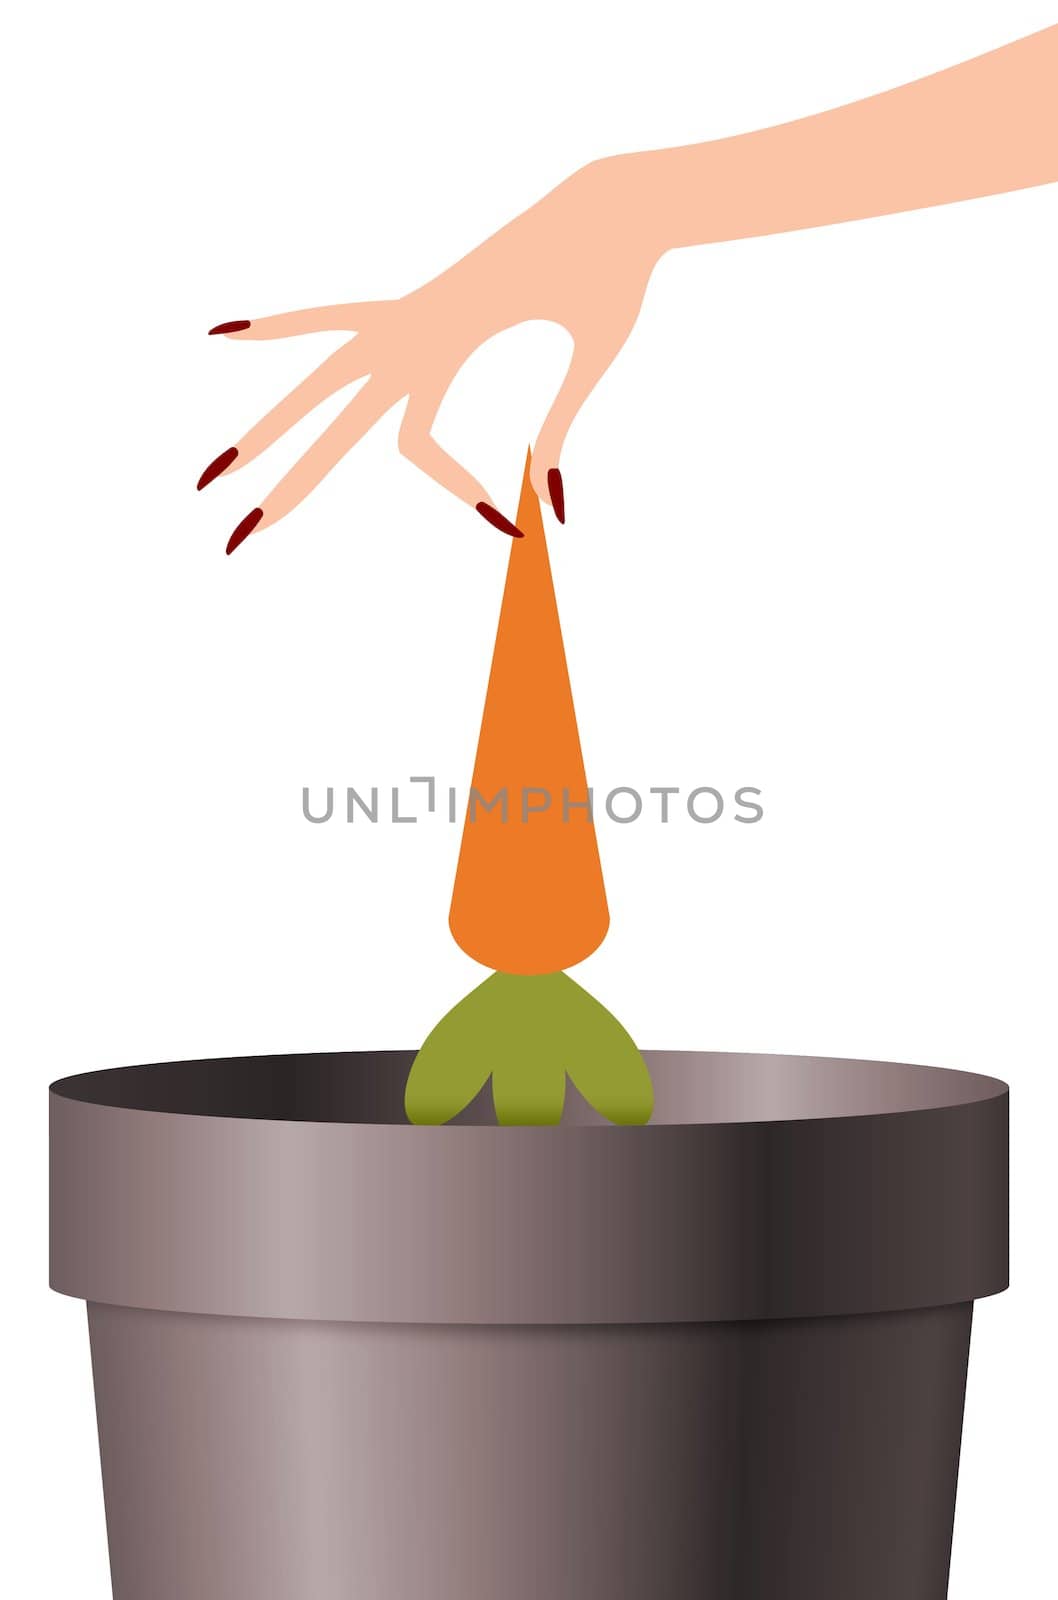 Illustration of a person throwing a vegetable into a bin